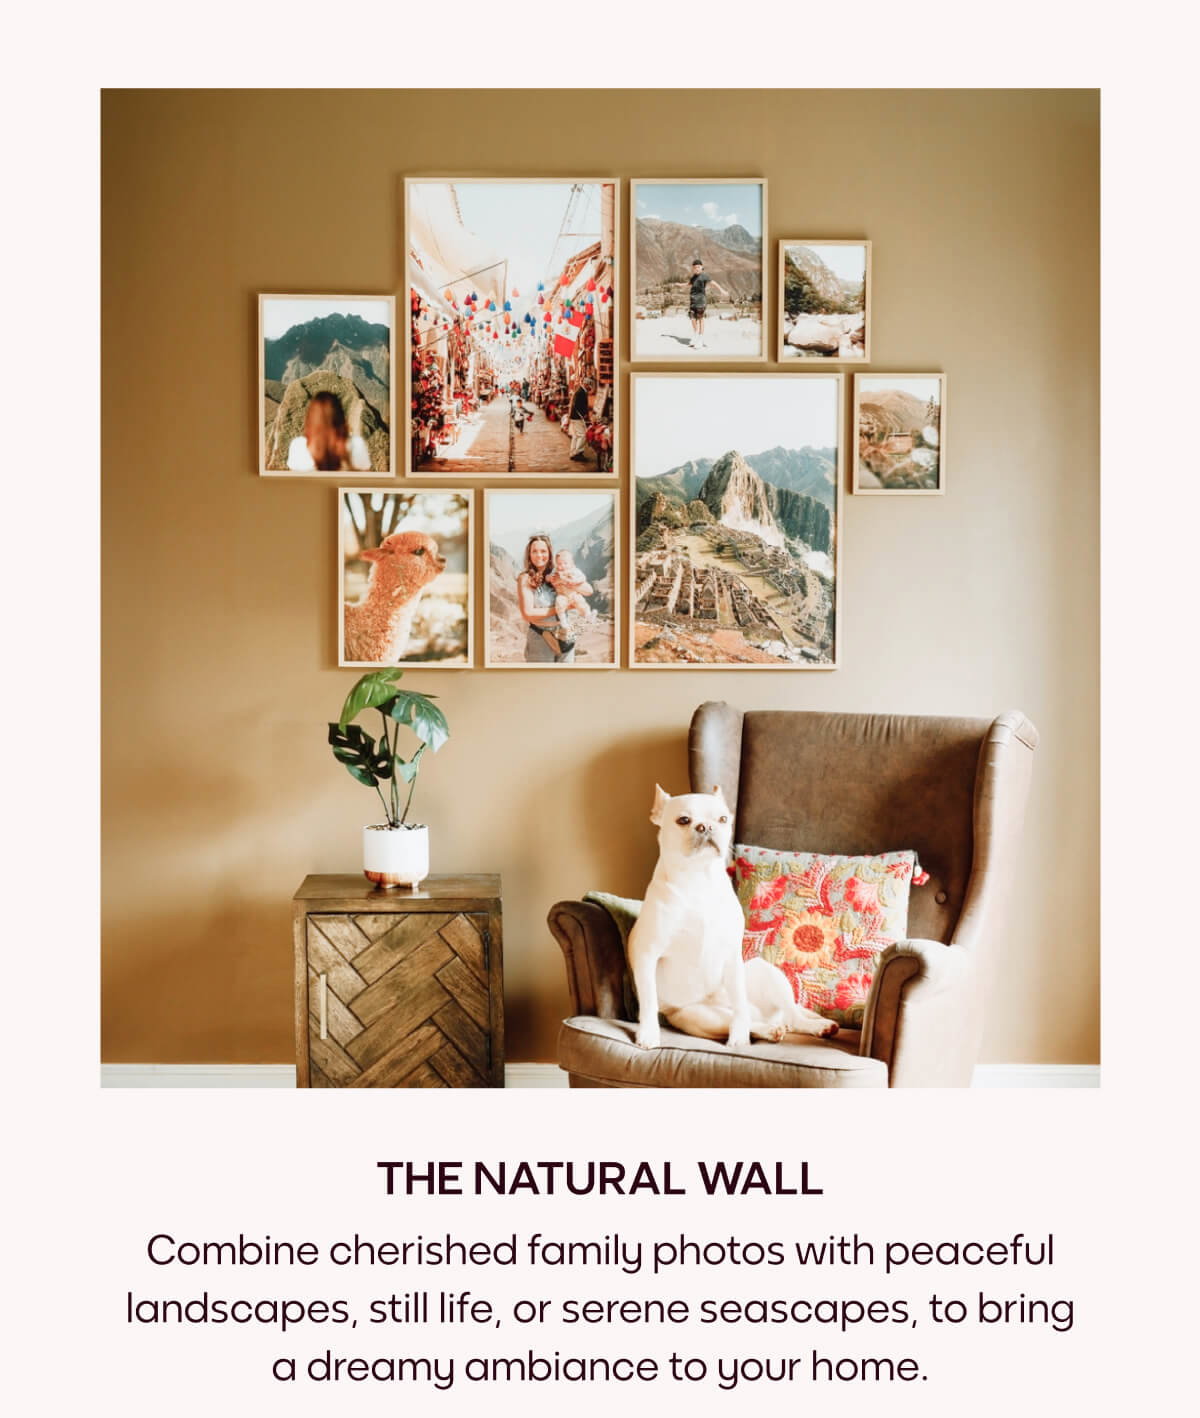 [MIXTILES] Design compliment worthy walls with Mixtiles. | ORDER NOW